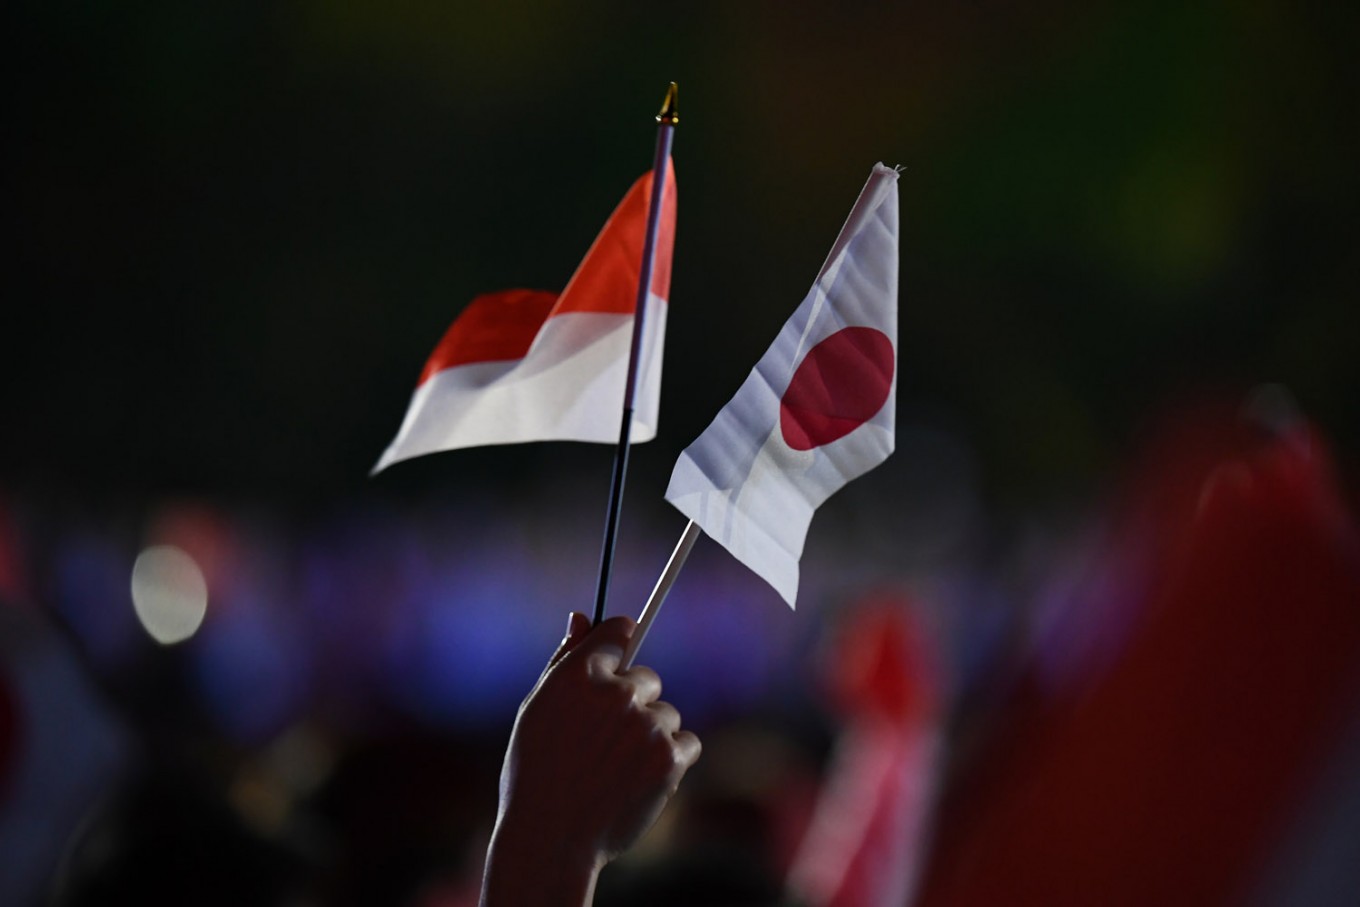 Indonesia and Japan: Role models in bilateral relations - Opinion - The